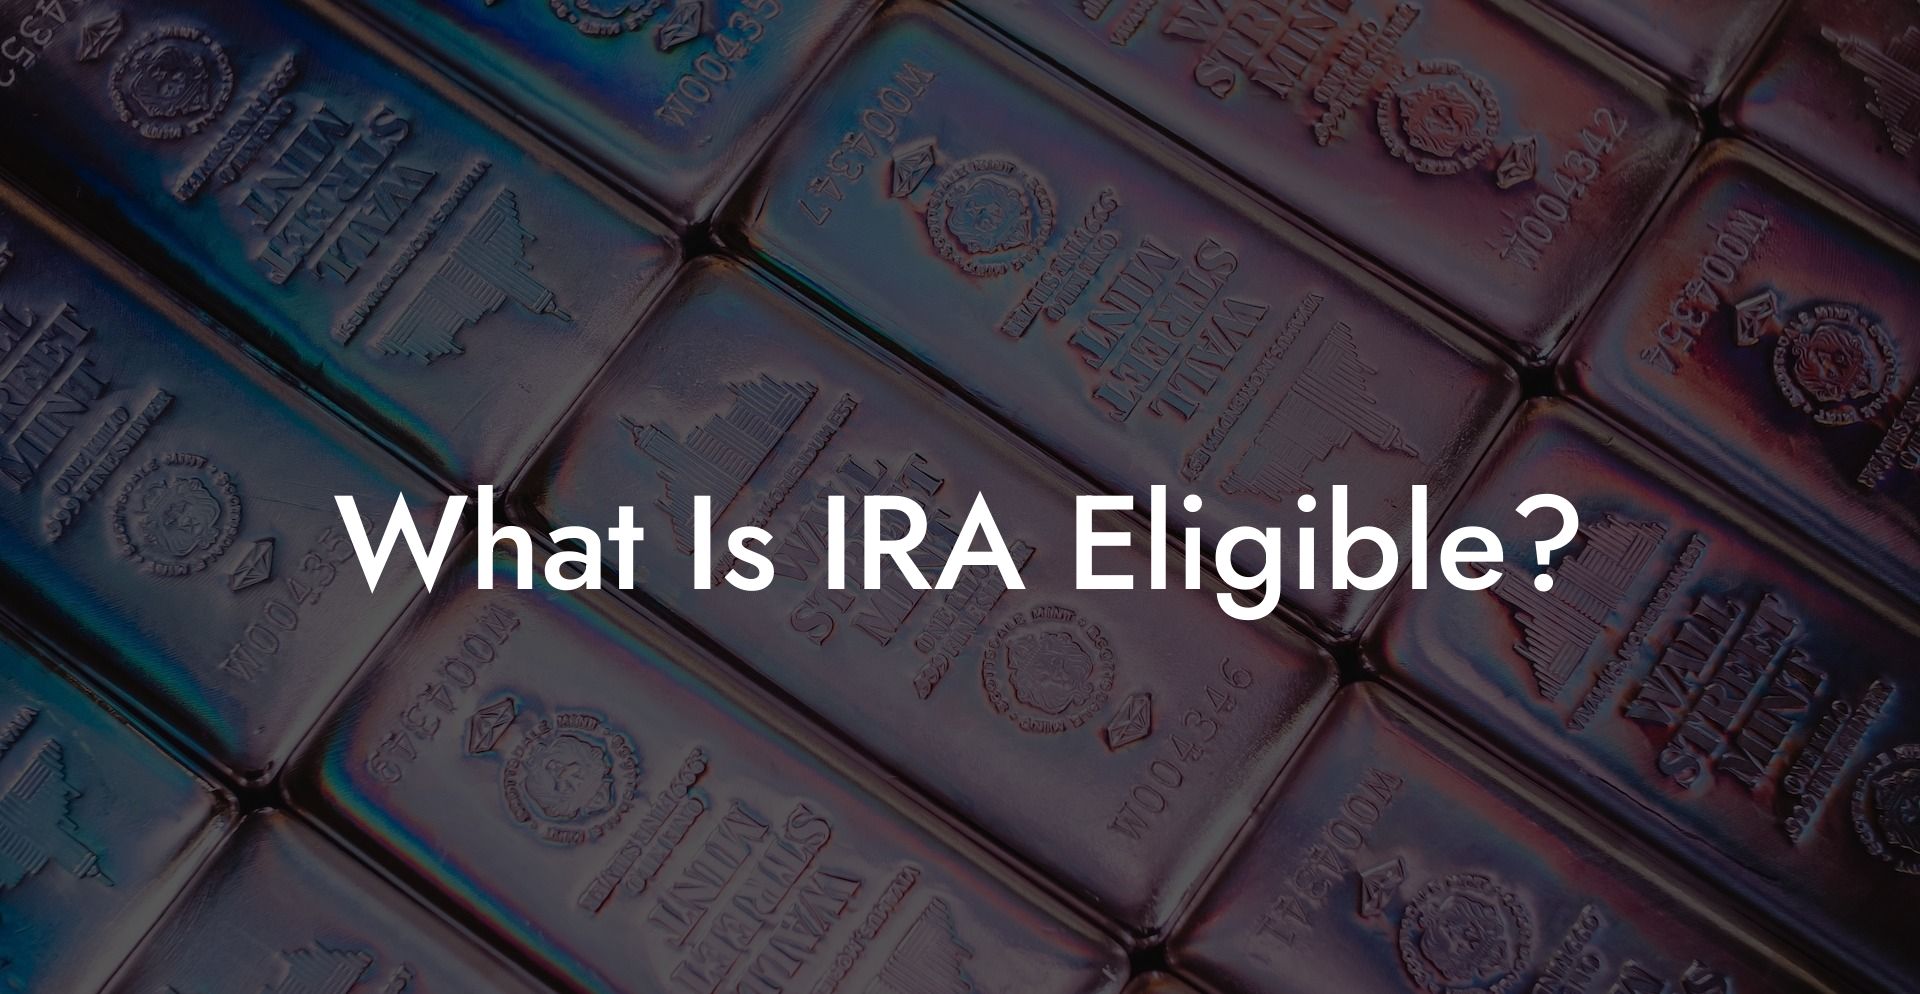 What Is IRA Eligible?